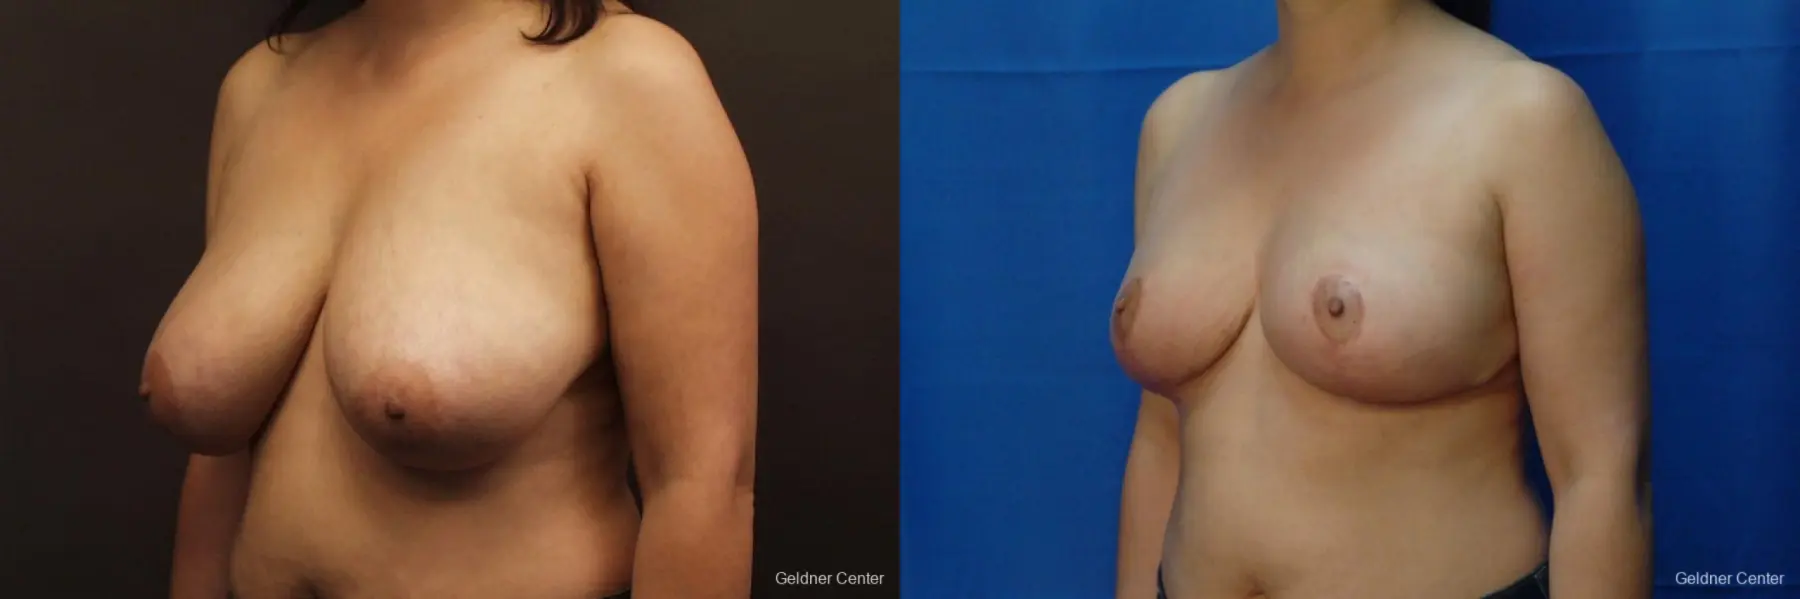 Chicago Breast Reduction 2416 - Before and After 4